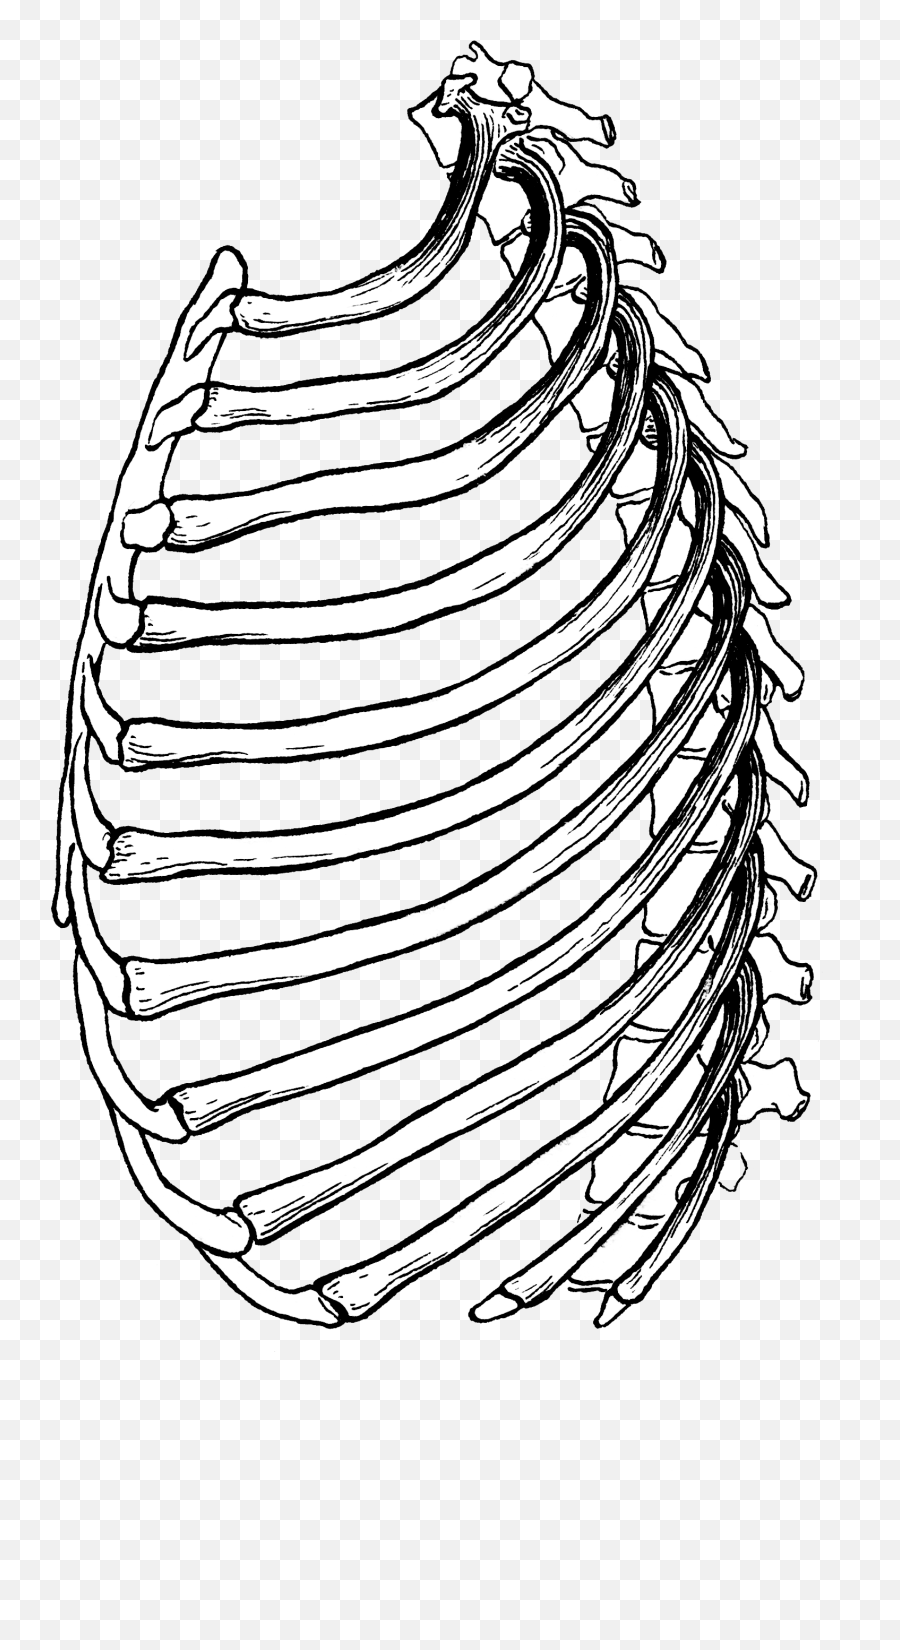 Filerib Cage Psfpng - Wikimedia Commons Animal Rib Cage Drawings,Cage Png